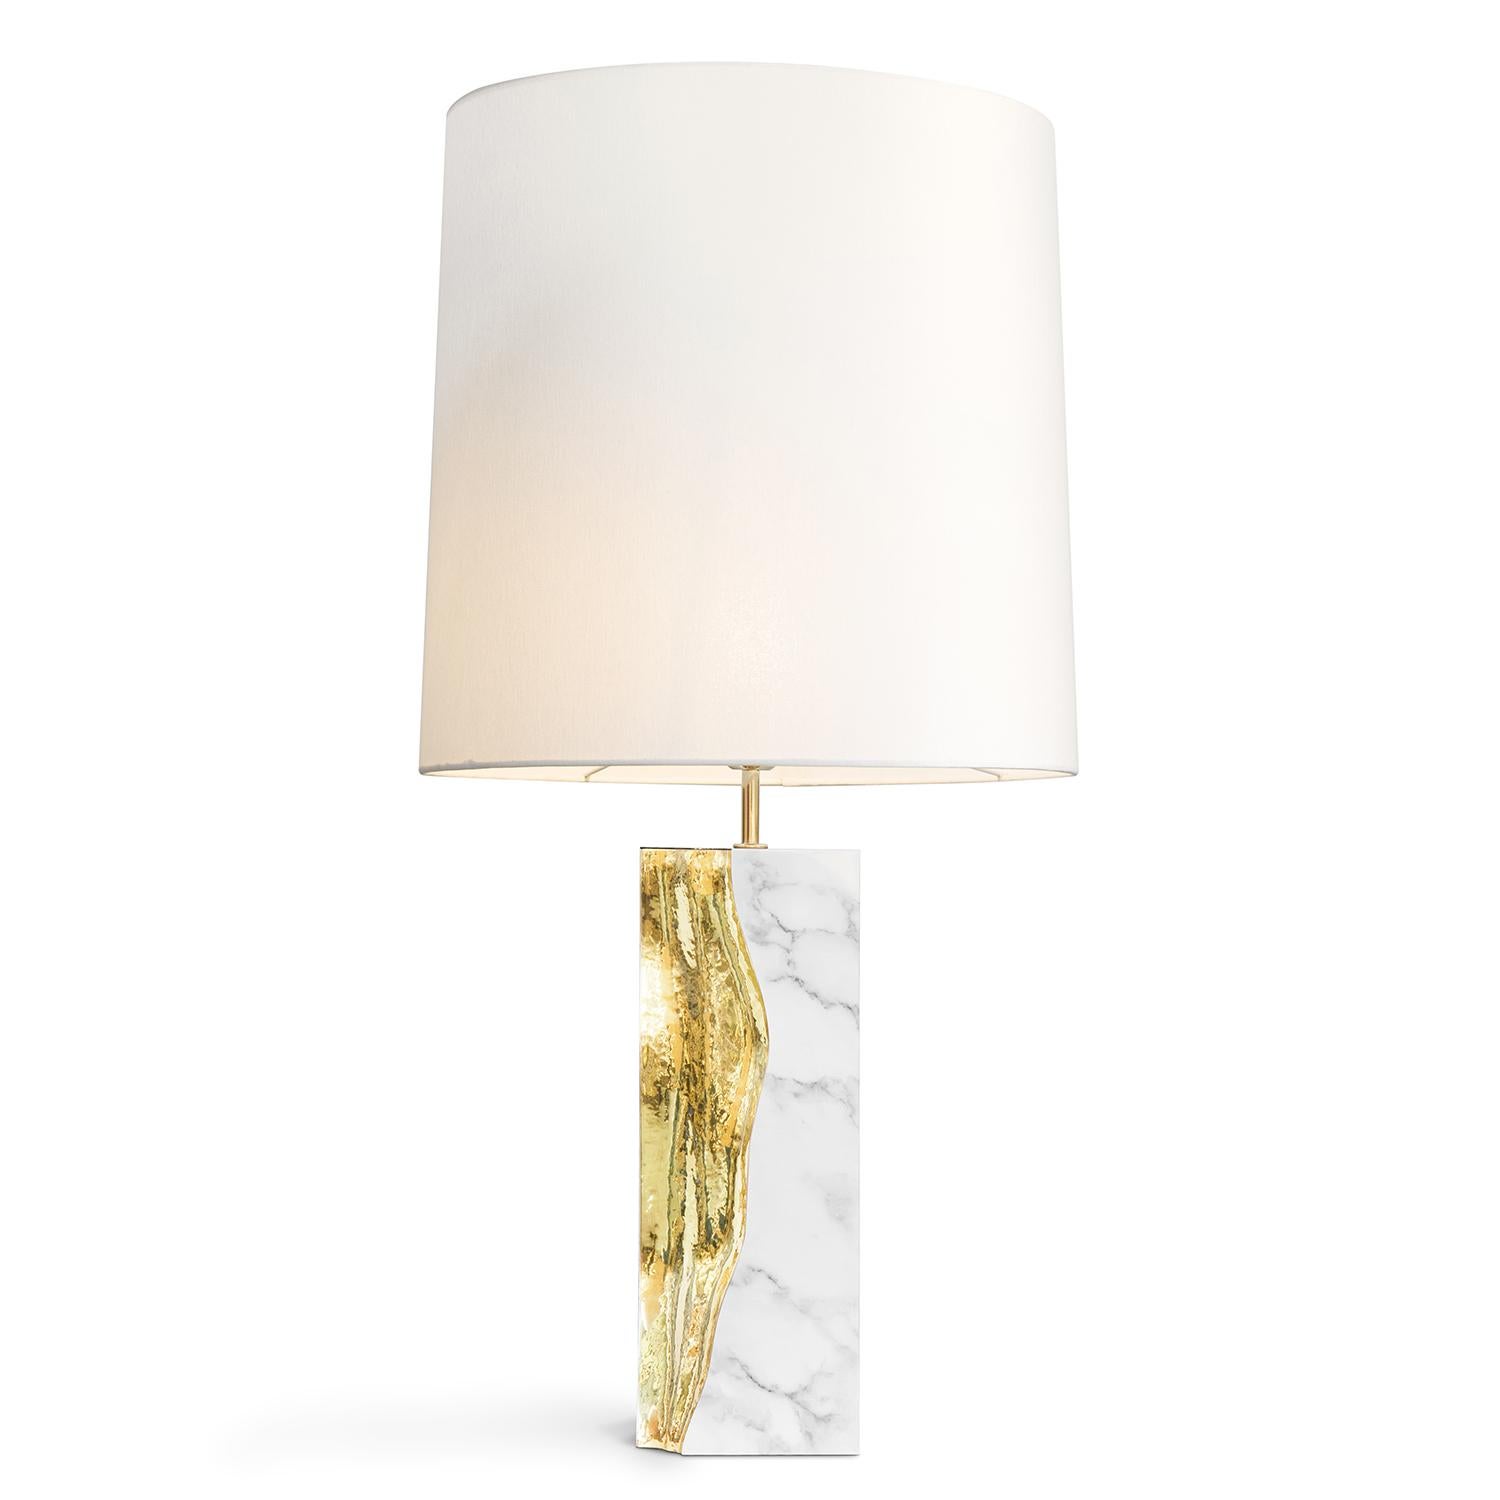 Table Lamp Paradise White Marble with white marble base
carved and polished. Base including polished brass detail,
including a round shade, dimensions : Diameter 40xH45cm.
Base dimensions: L15xD15xH40cm.
1 bulb, lamp holder type E27, max 40 watt,